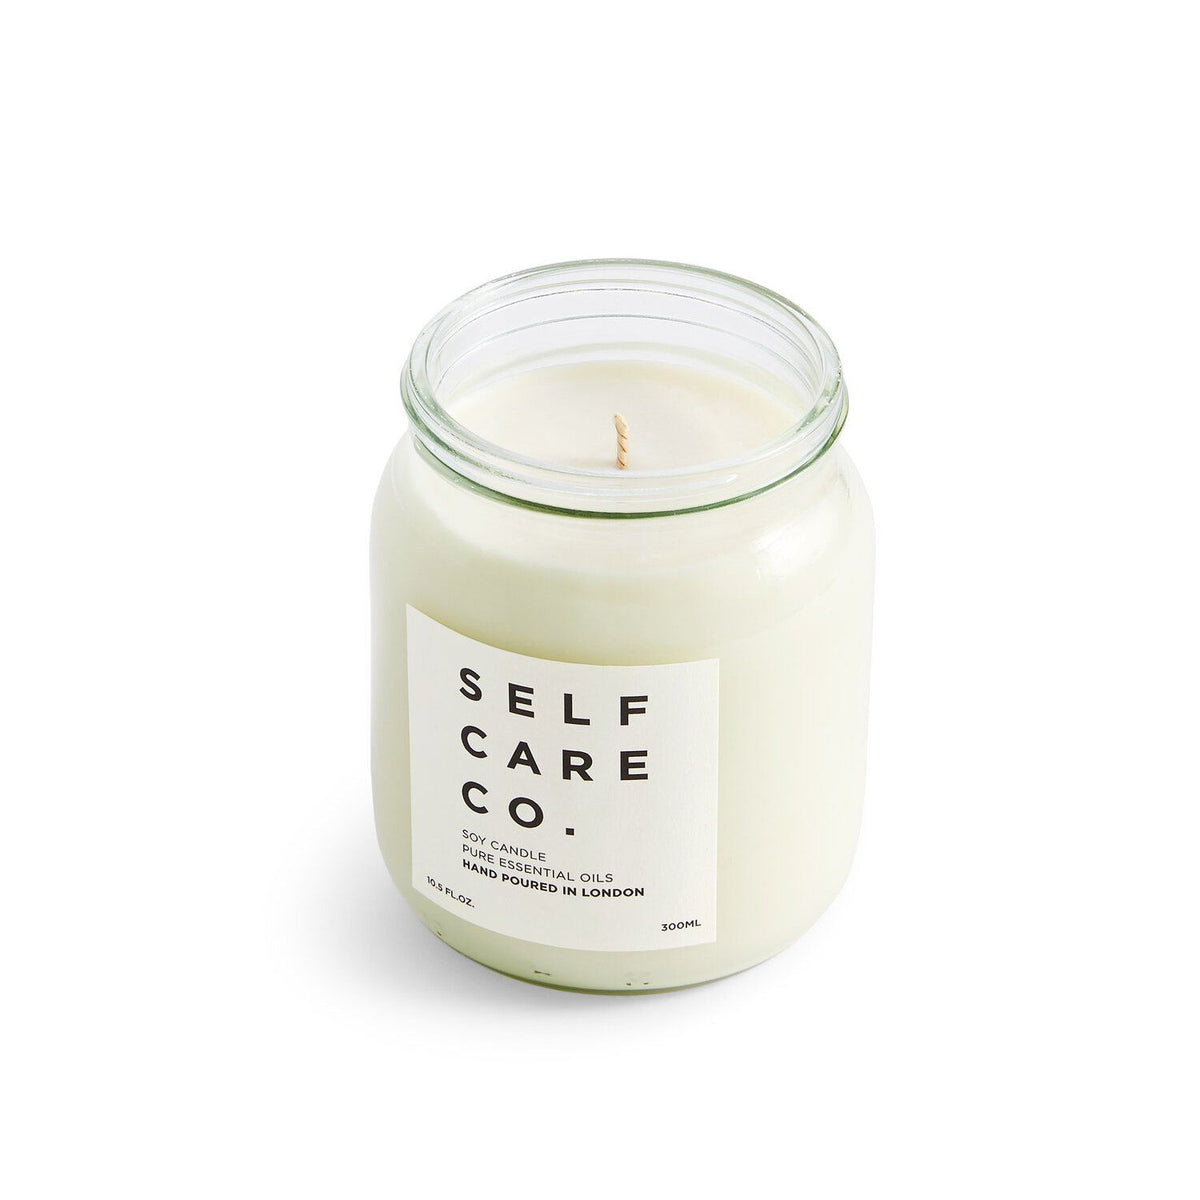 Lime, Basil + Black Pepper Aromatherapy Candle Kerzen Self Care Co. - Genuine Selection